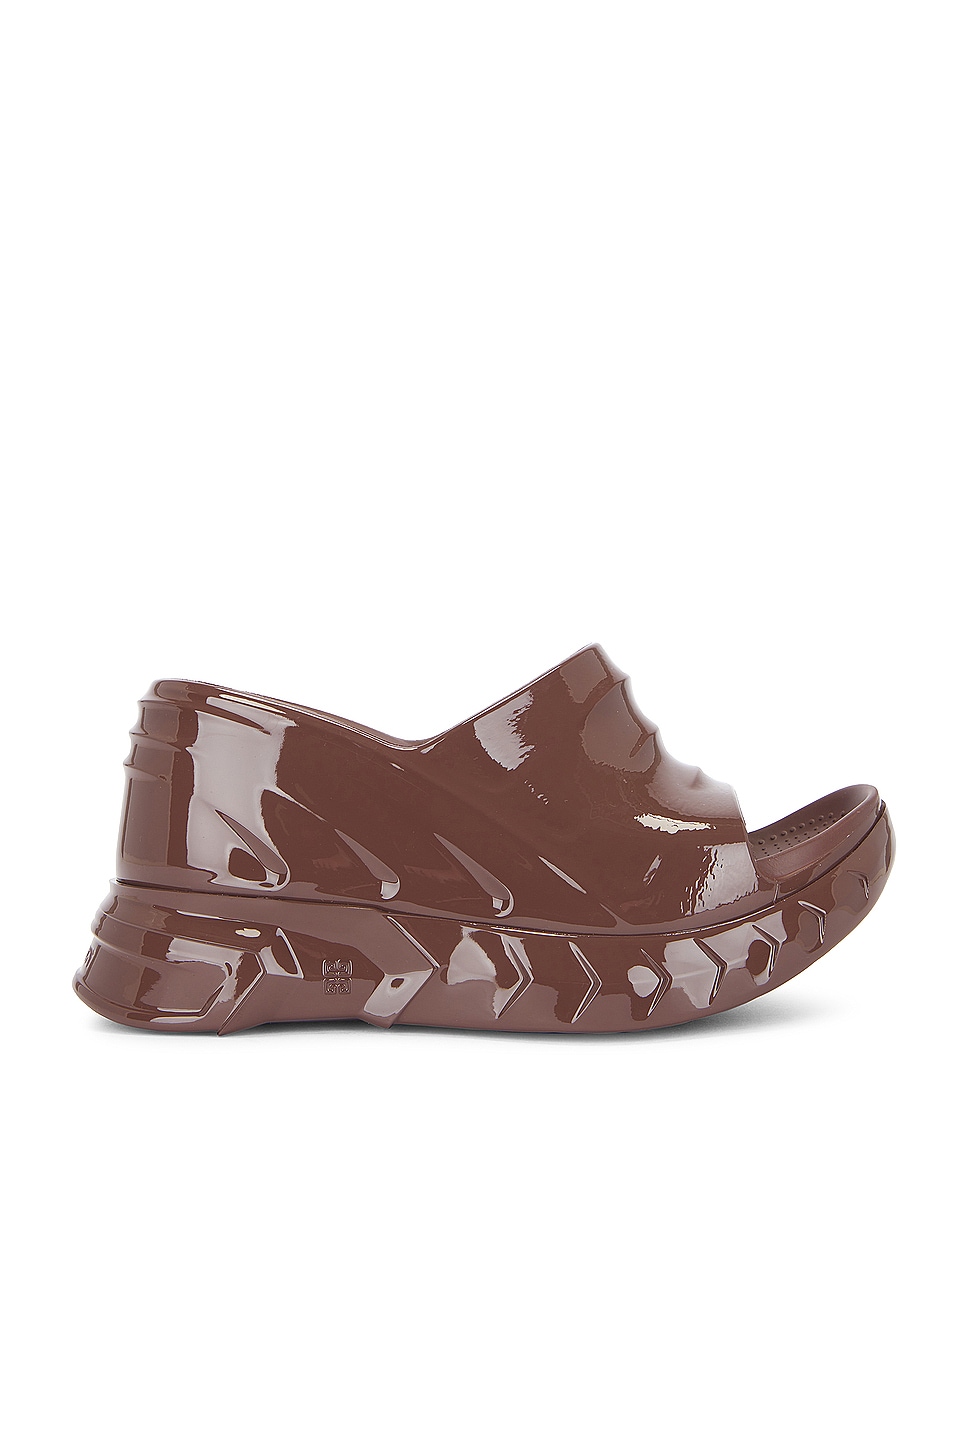 Image 1 of Givenchy Marshmallow Wedge Sandal in Chocolate